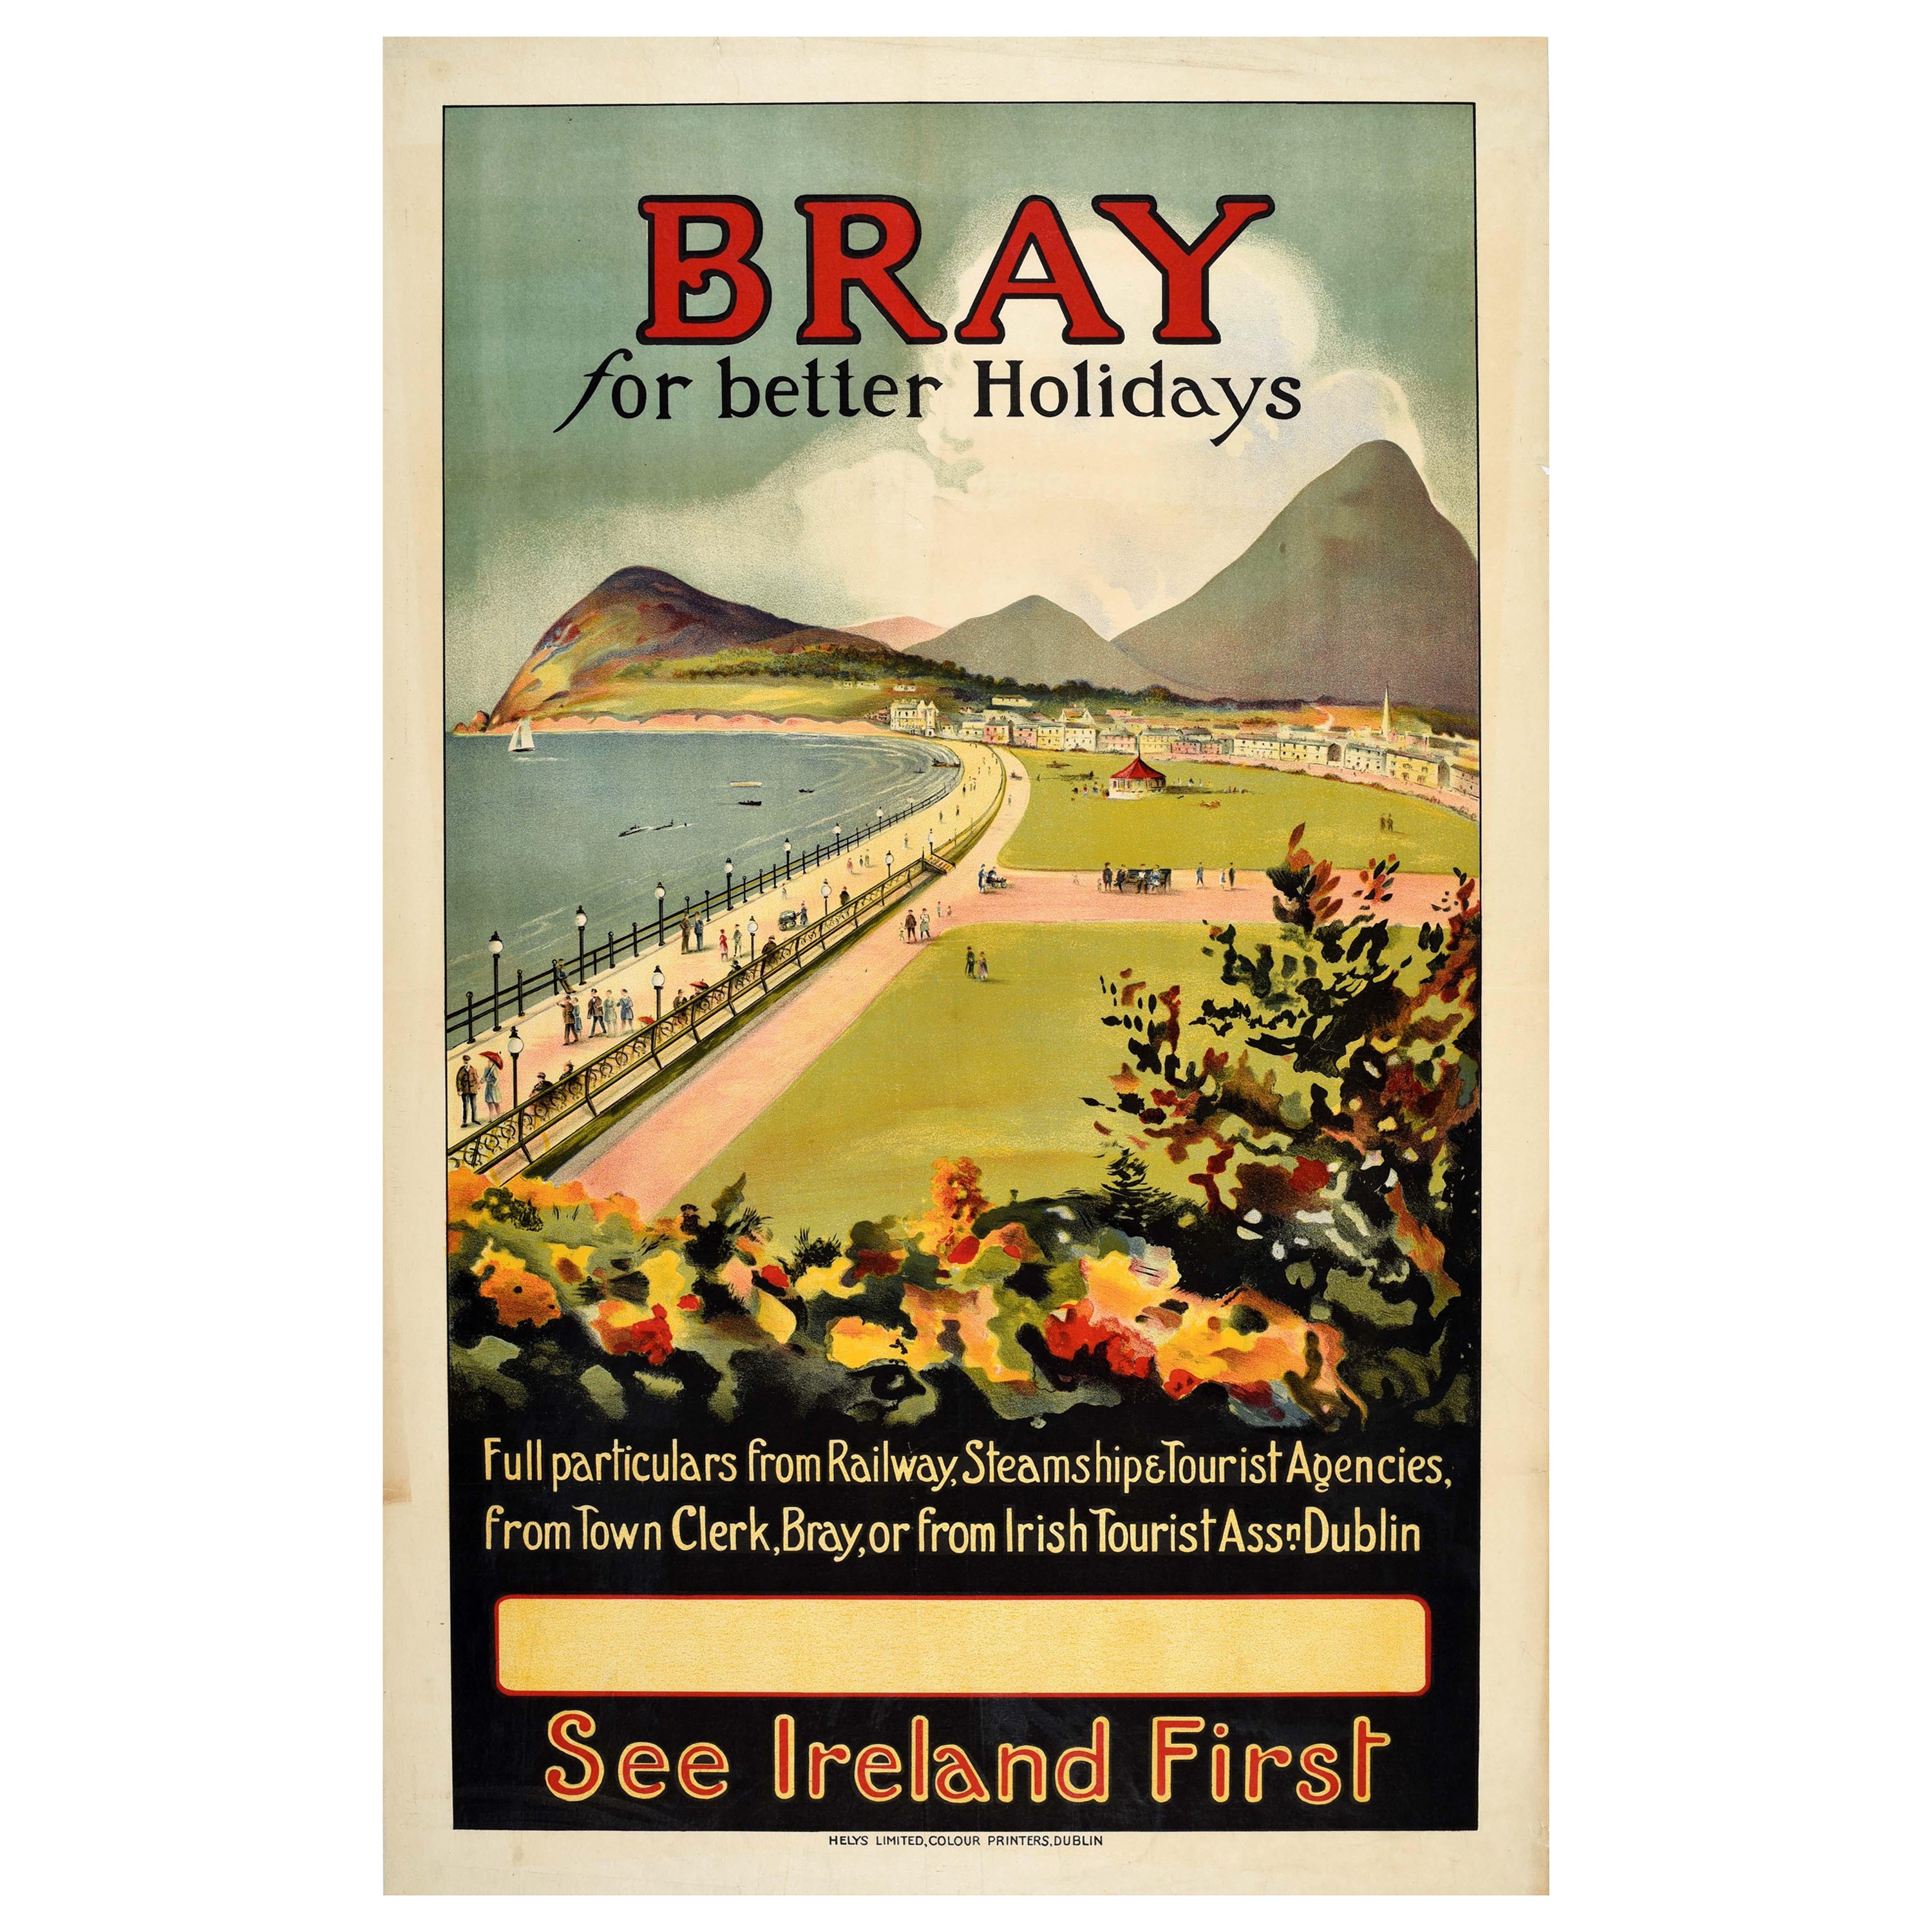 Original Vintage Train Travel Poster Bray County Wicklow Ireland Better Holidays For Sale